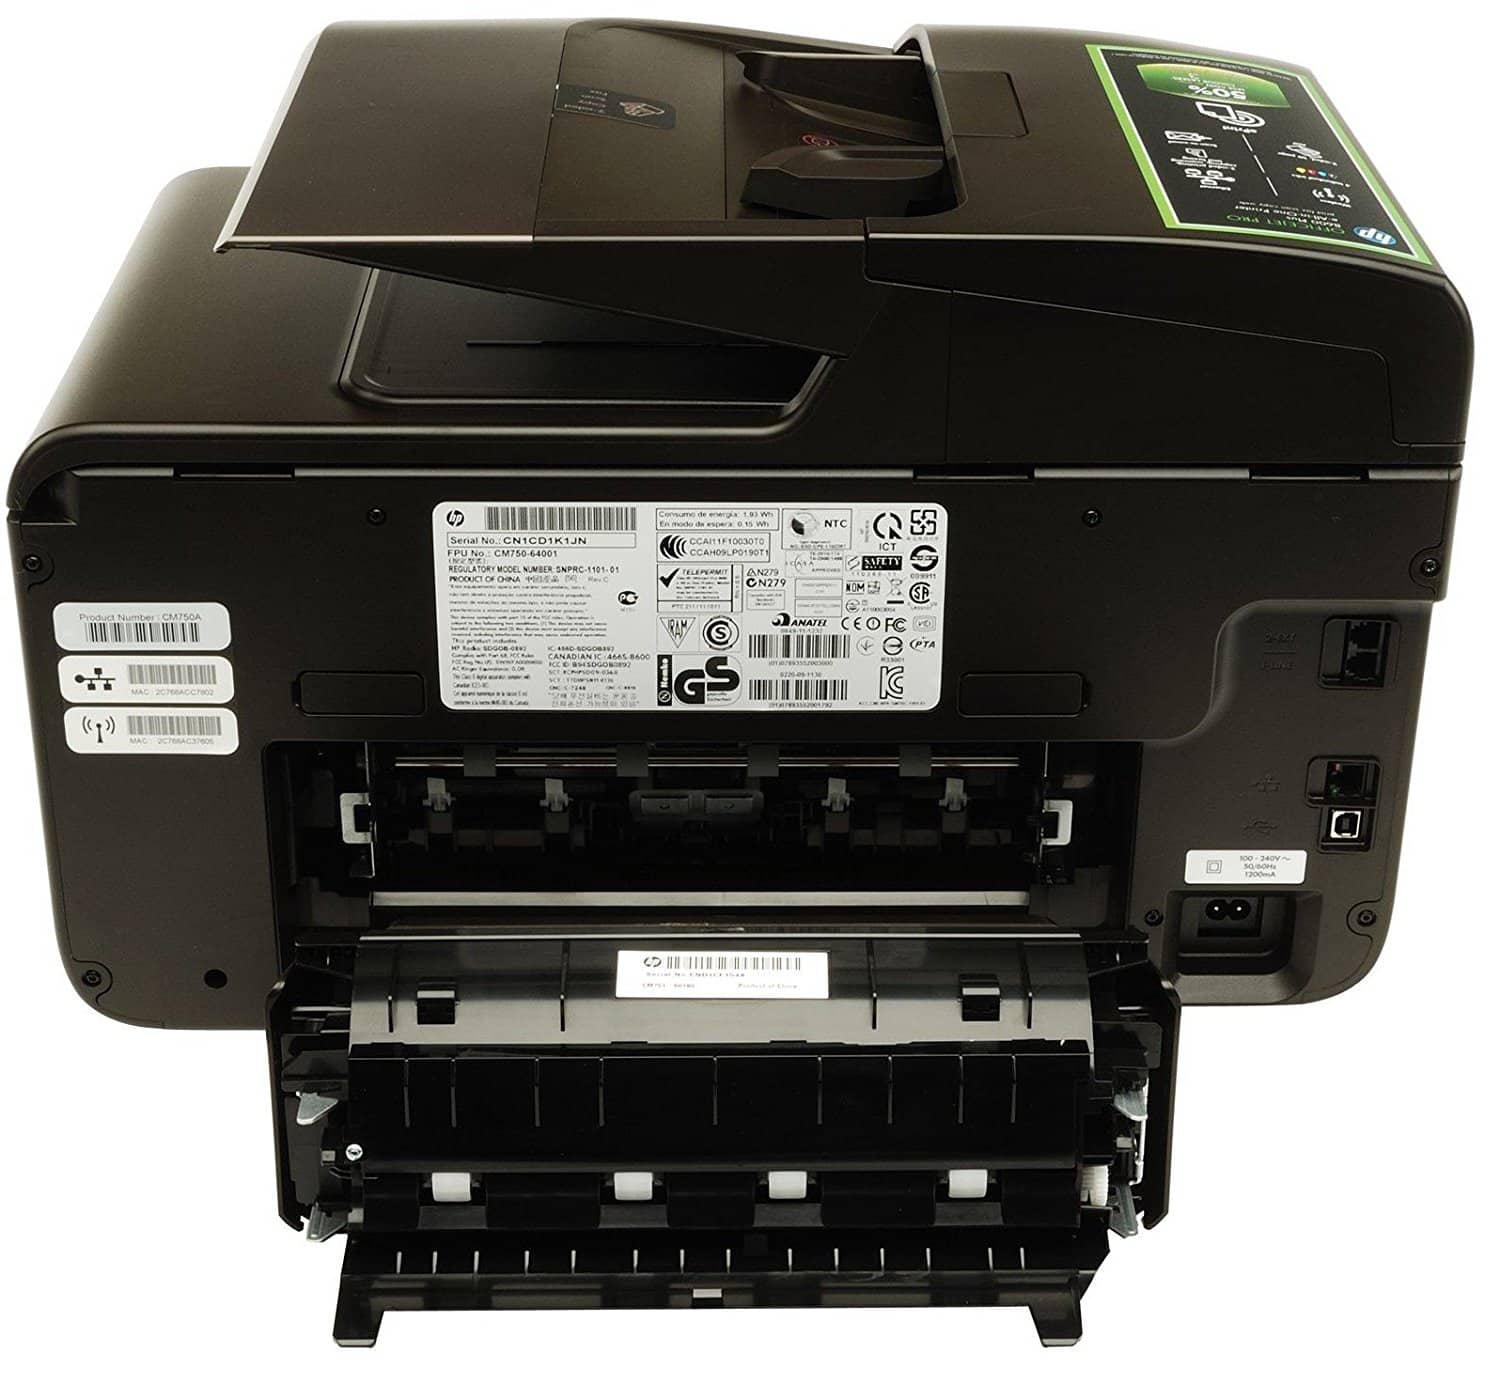 hp officejet pro 8600 driver without fax